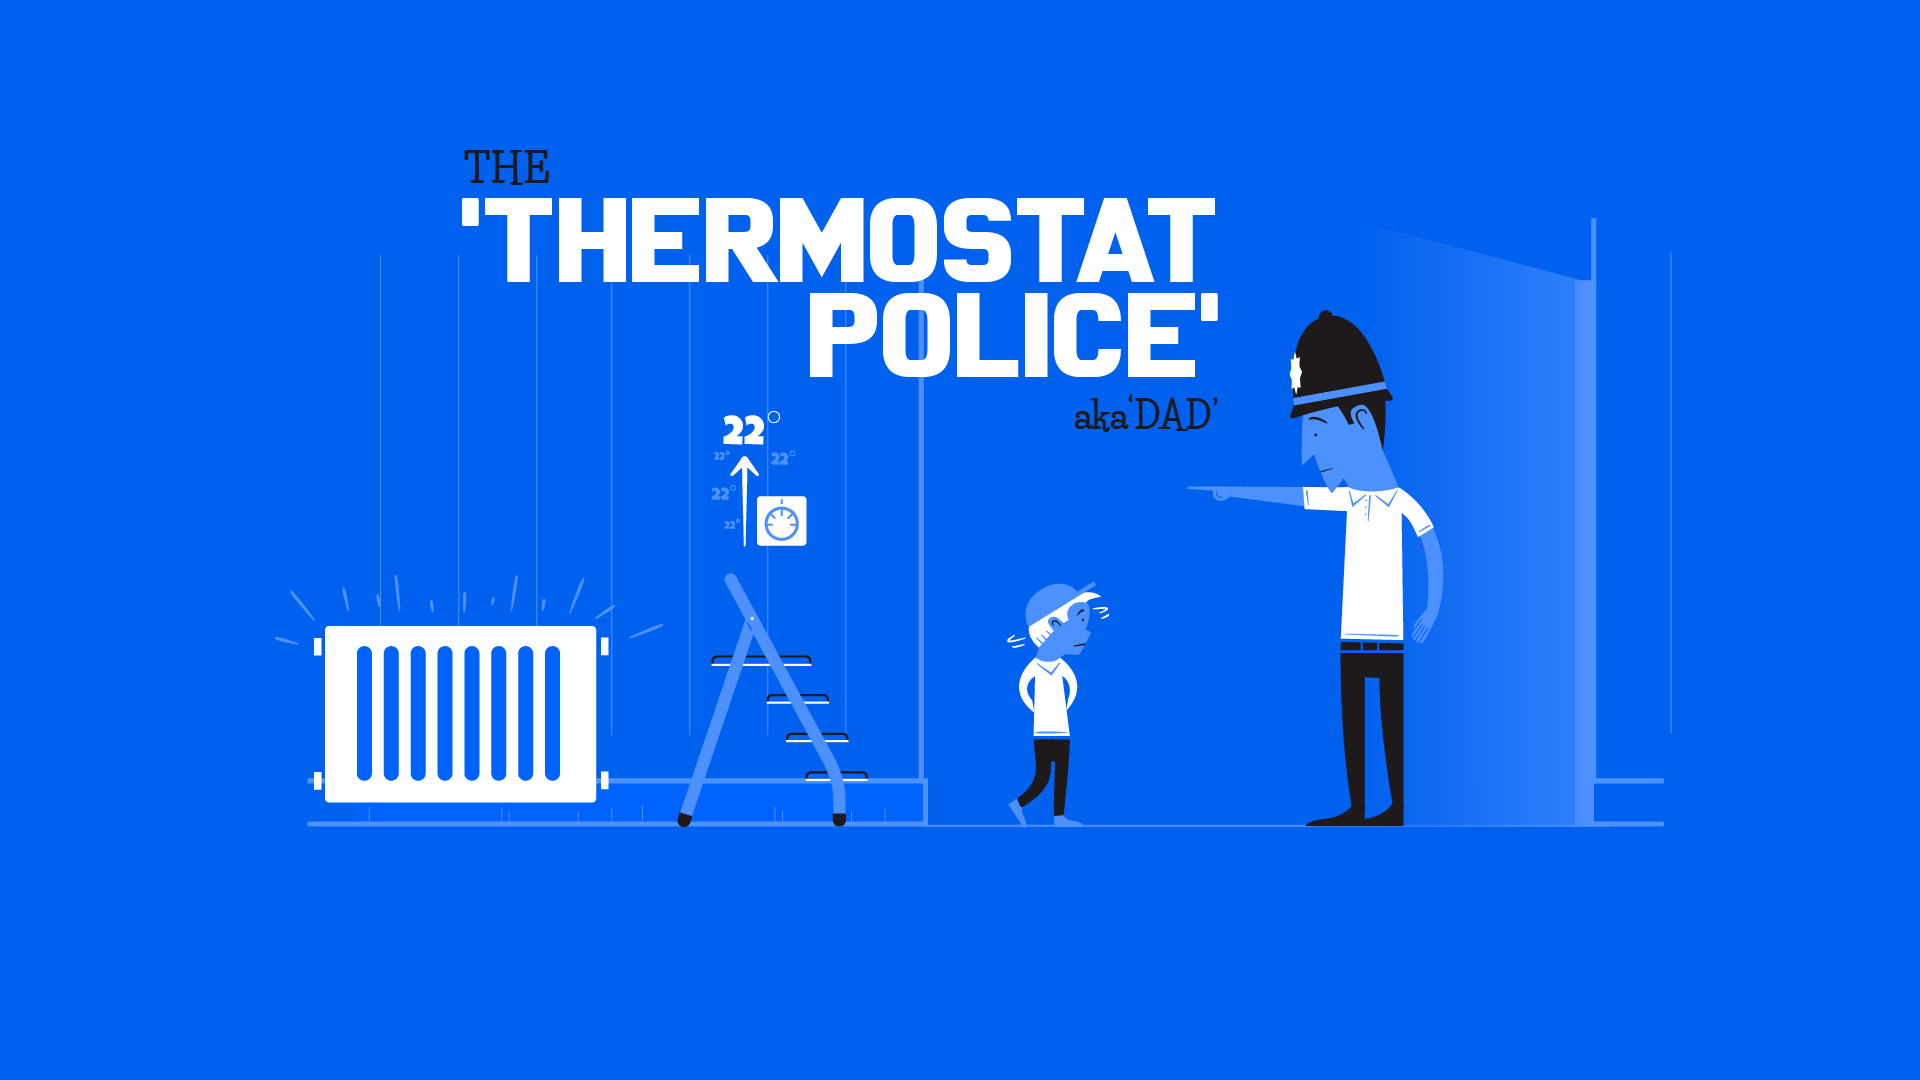 Thermostat police